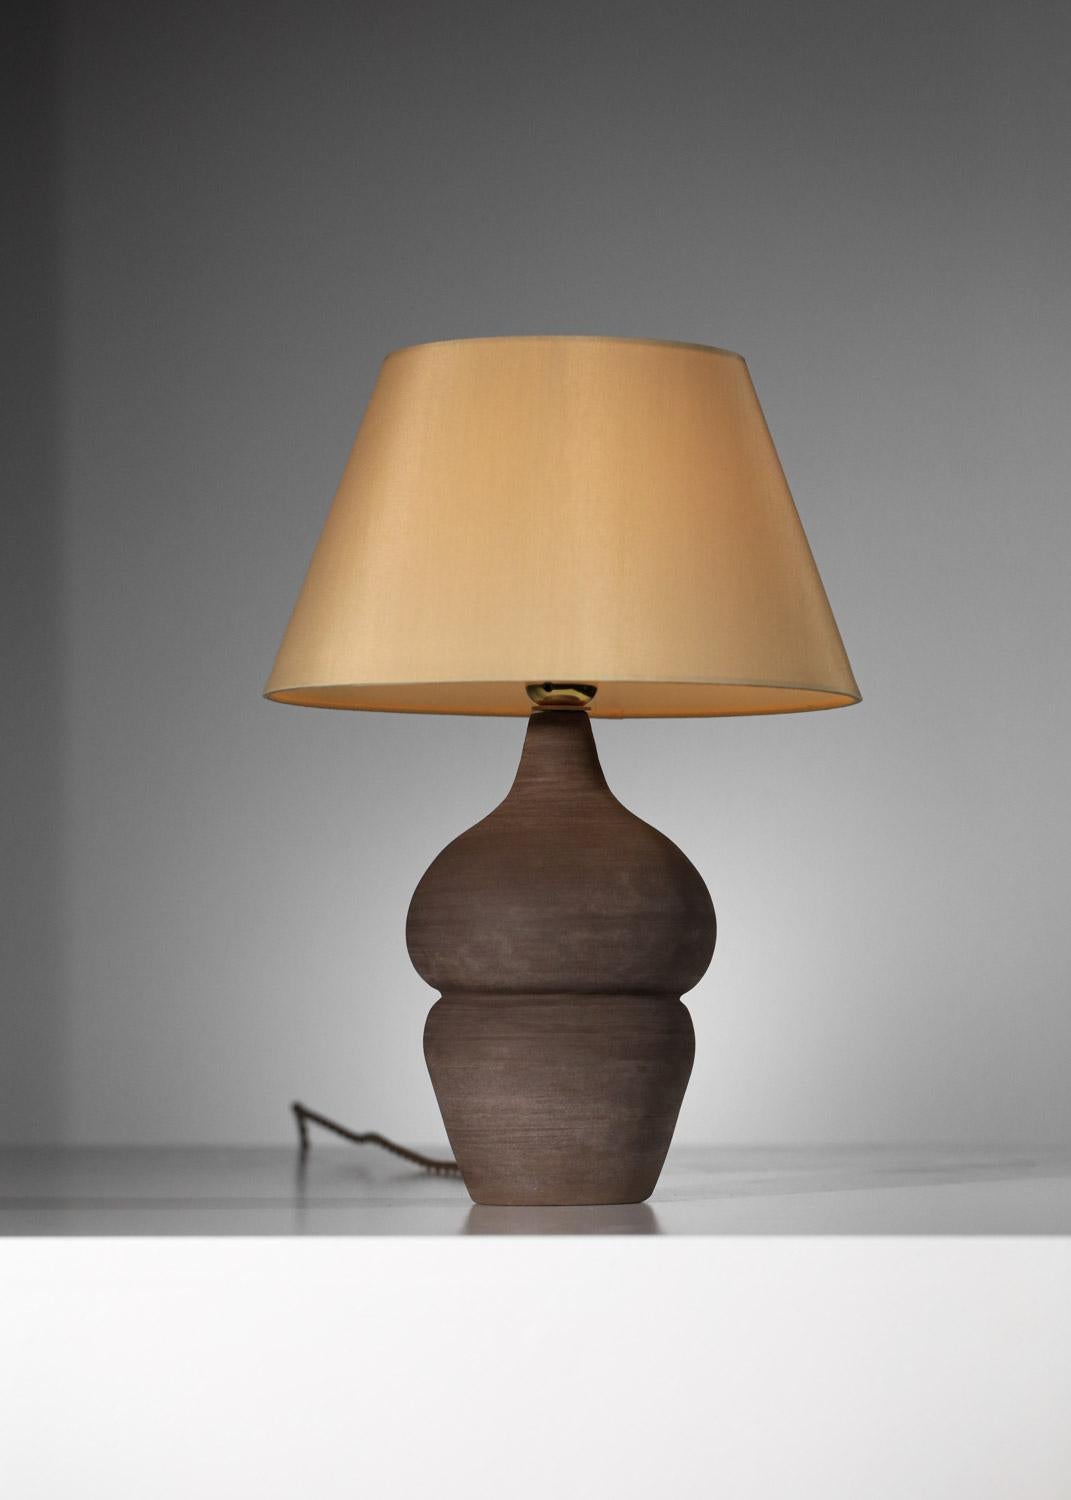 Lamp in ceramic and black chamotte stoneware by Katia Mihaylova For Sale 2